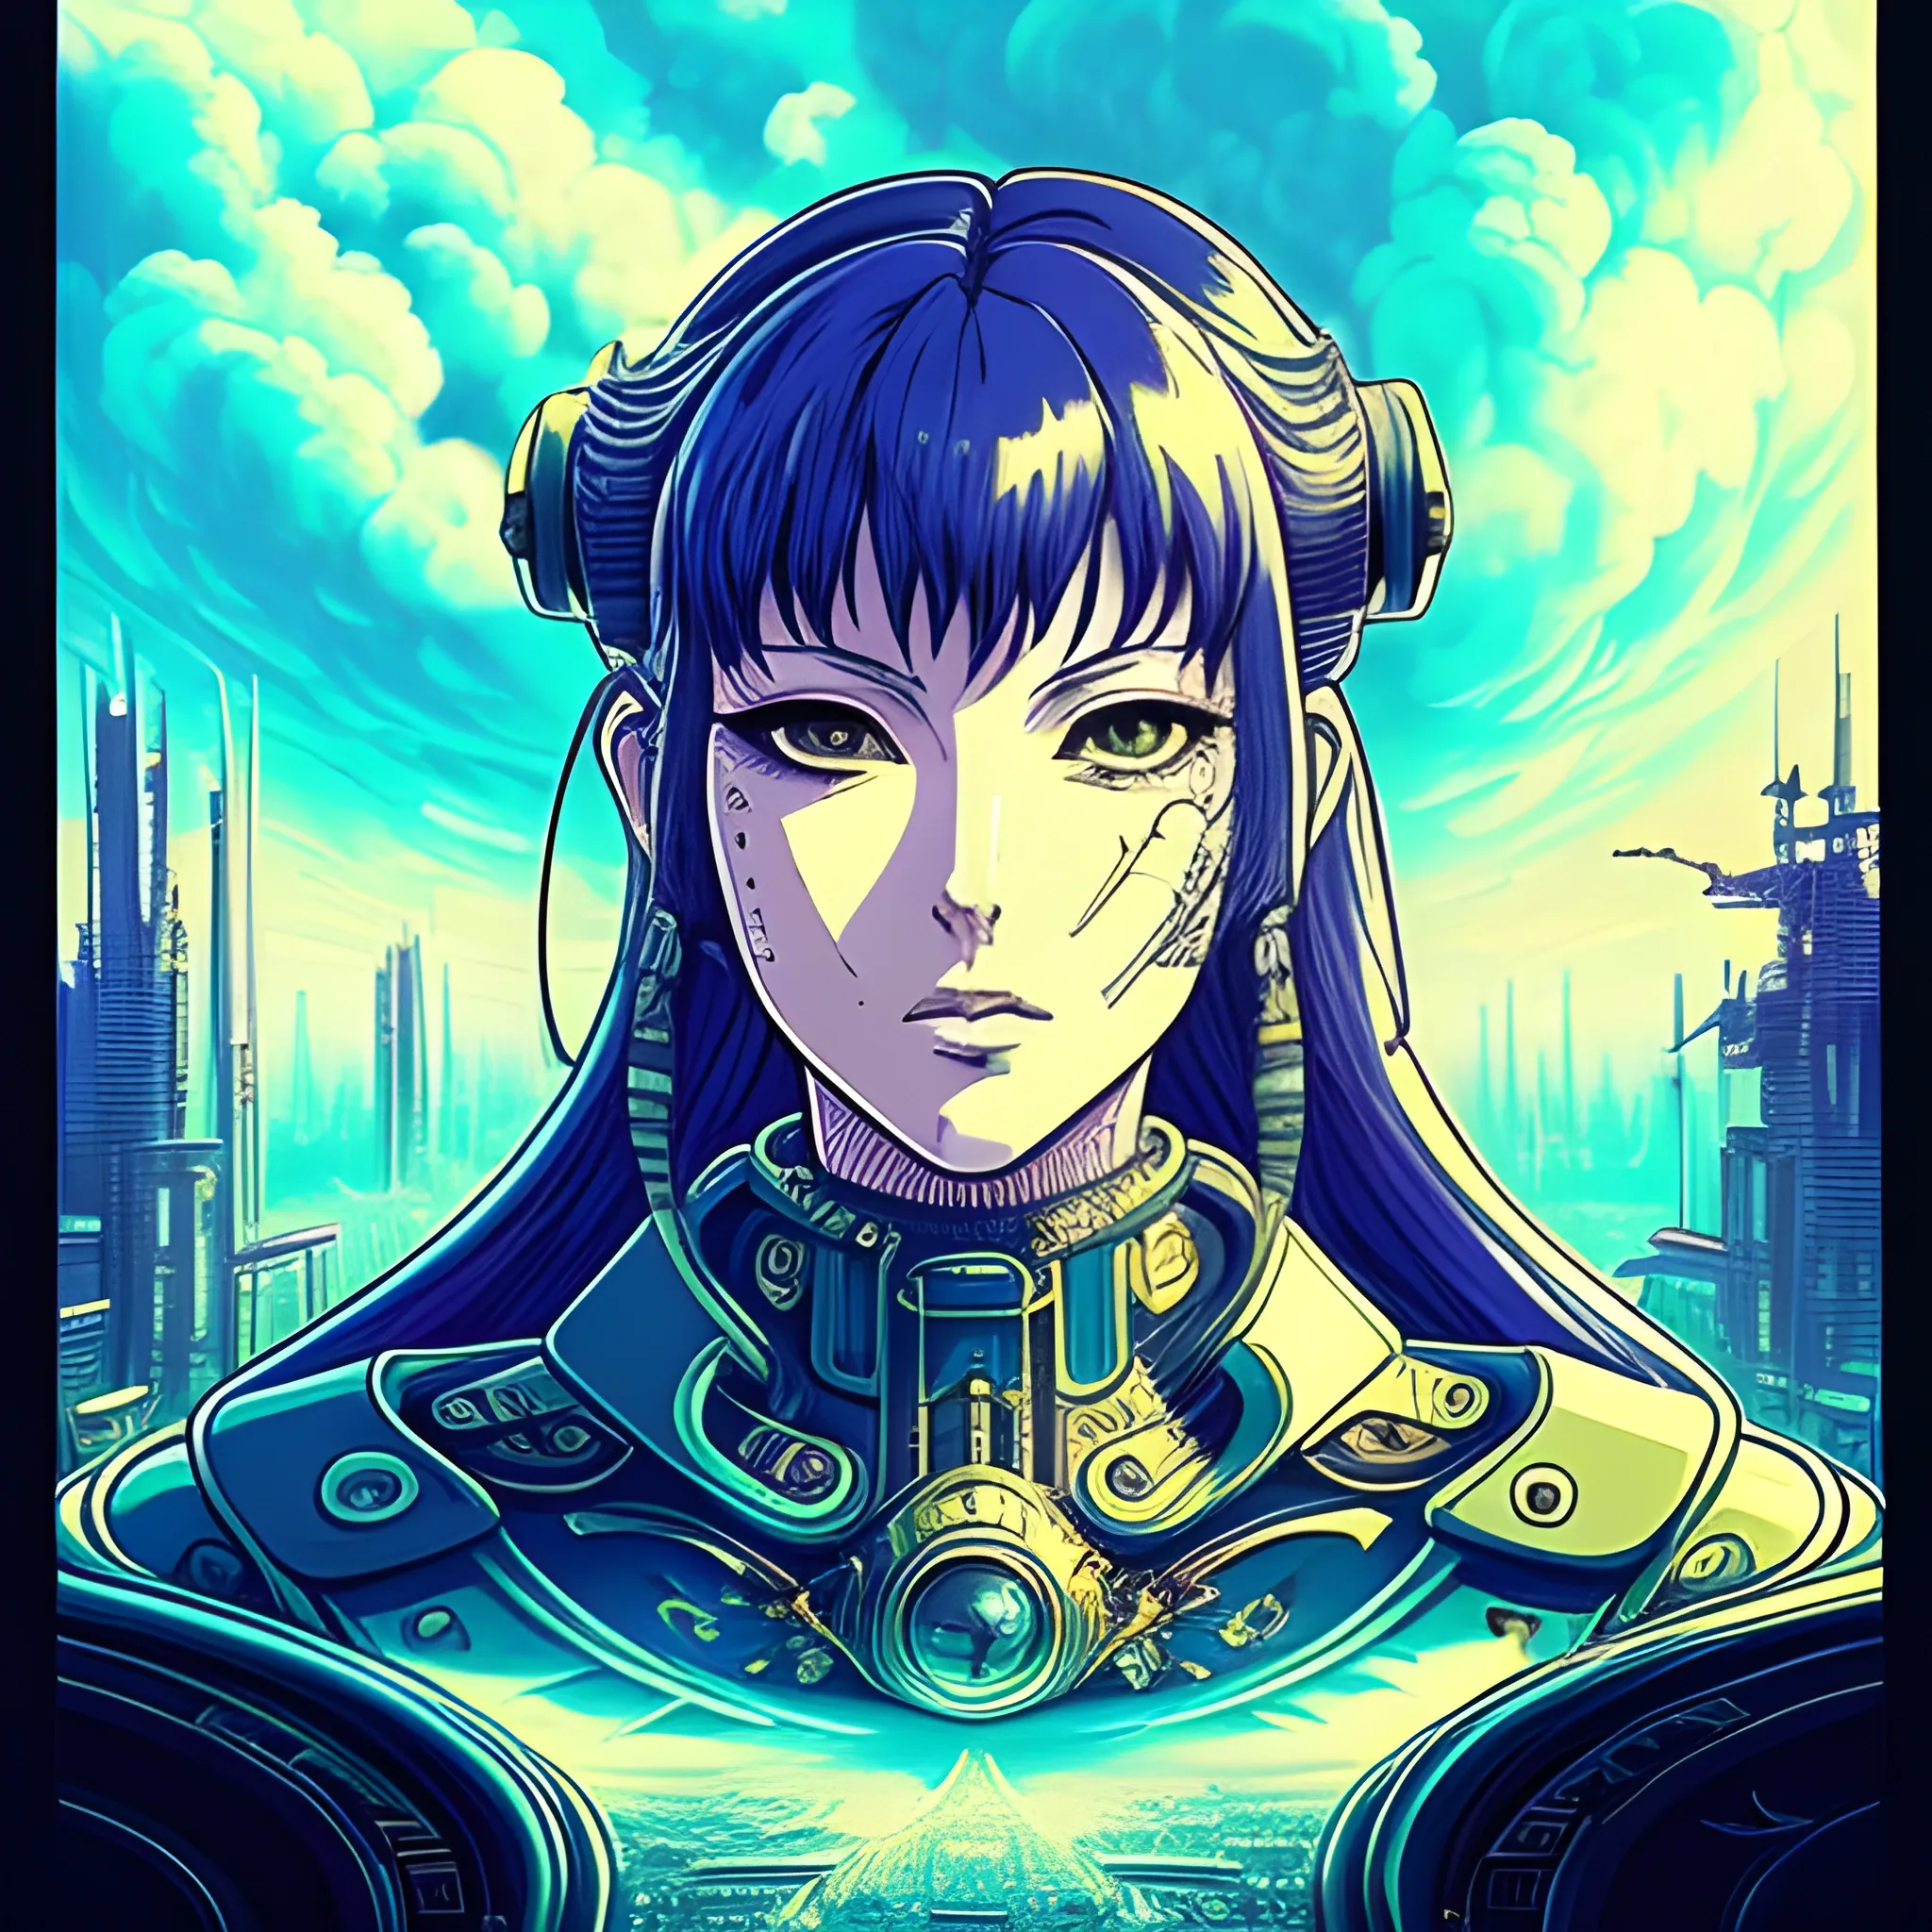 Beautiful portrait of Lorena Damian floating in the sky, surrounded by clouds, with soft lighting that highlights the intricate details of the face. The portrait is in an imaginative fantasy concept art style by Oda, with a cyberpunk twist. The environment is detailed and intricate, with neon lights and futuristic buildings in the background. The portrait is in sharp focus, and the overall style is reminiscent of vintage 90's anime. The artwork is perfect for environmental arcade art or as a concept art for a video game.